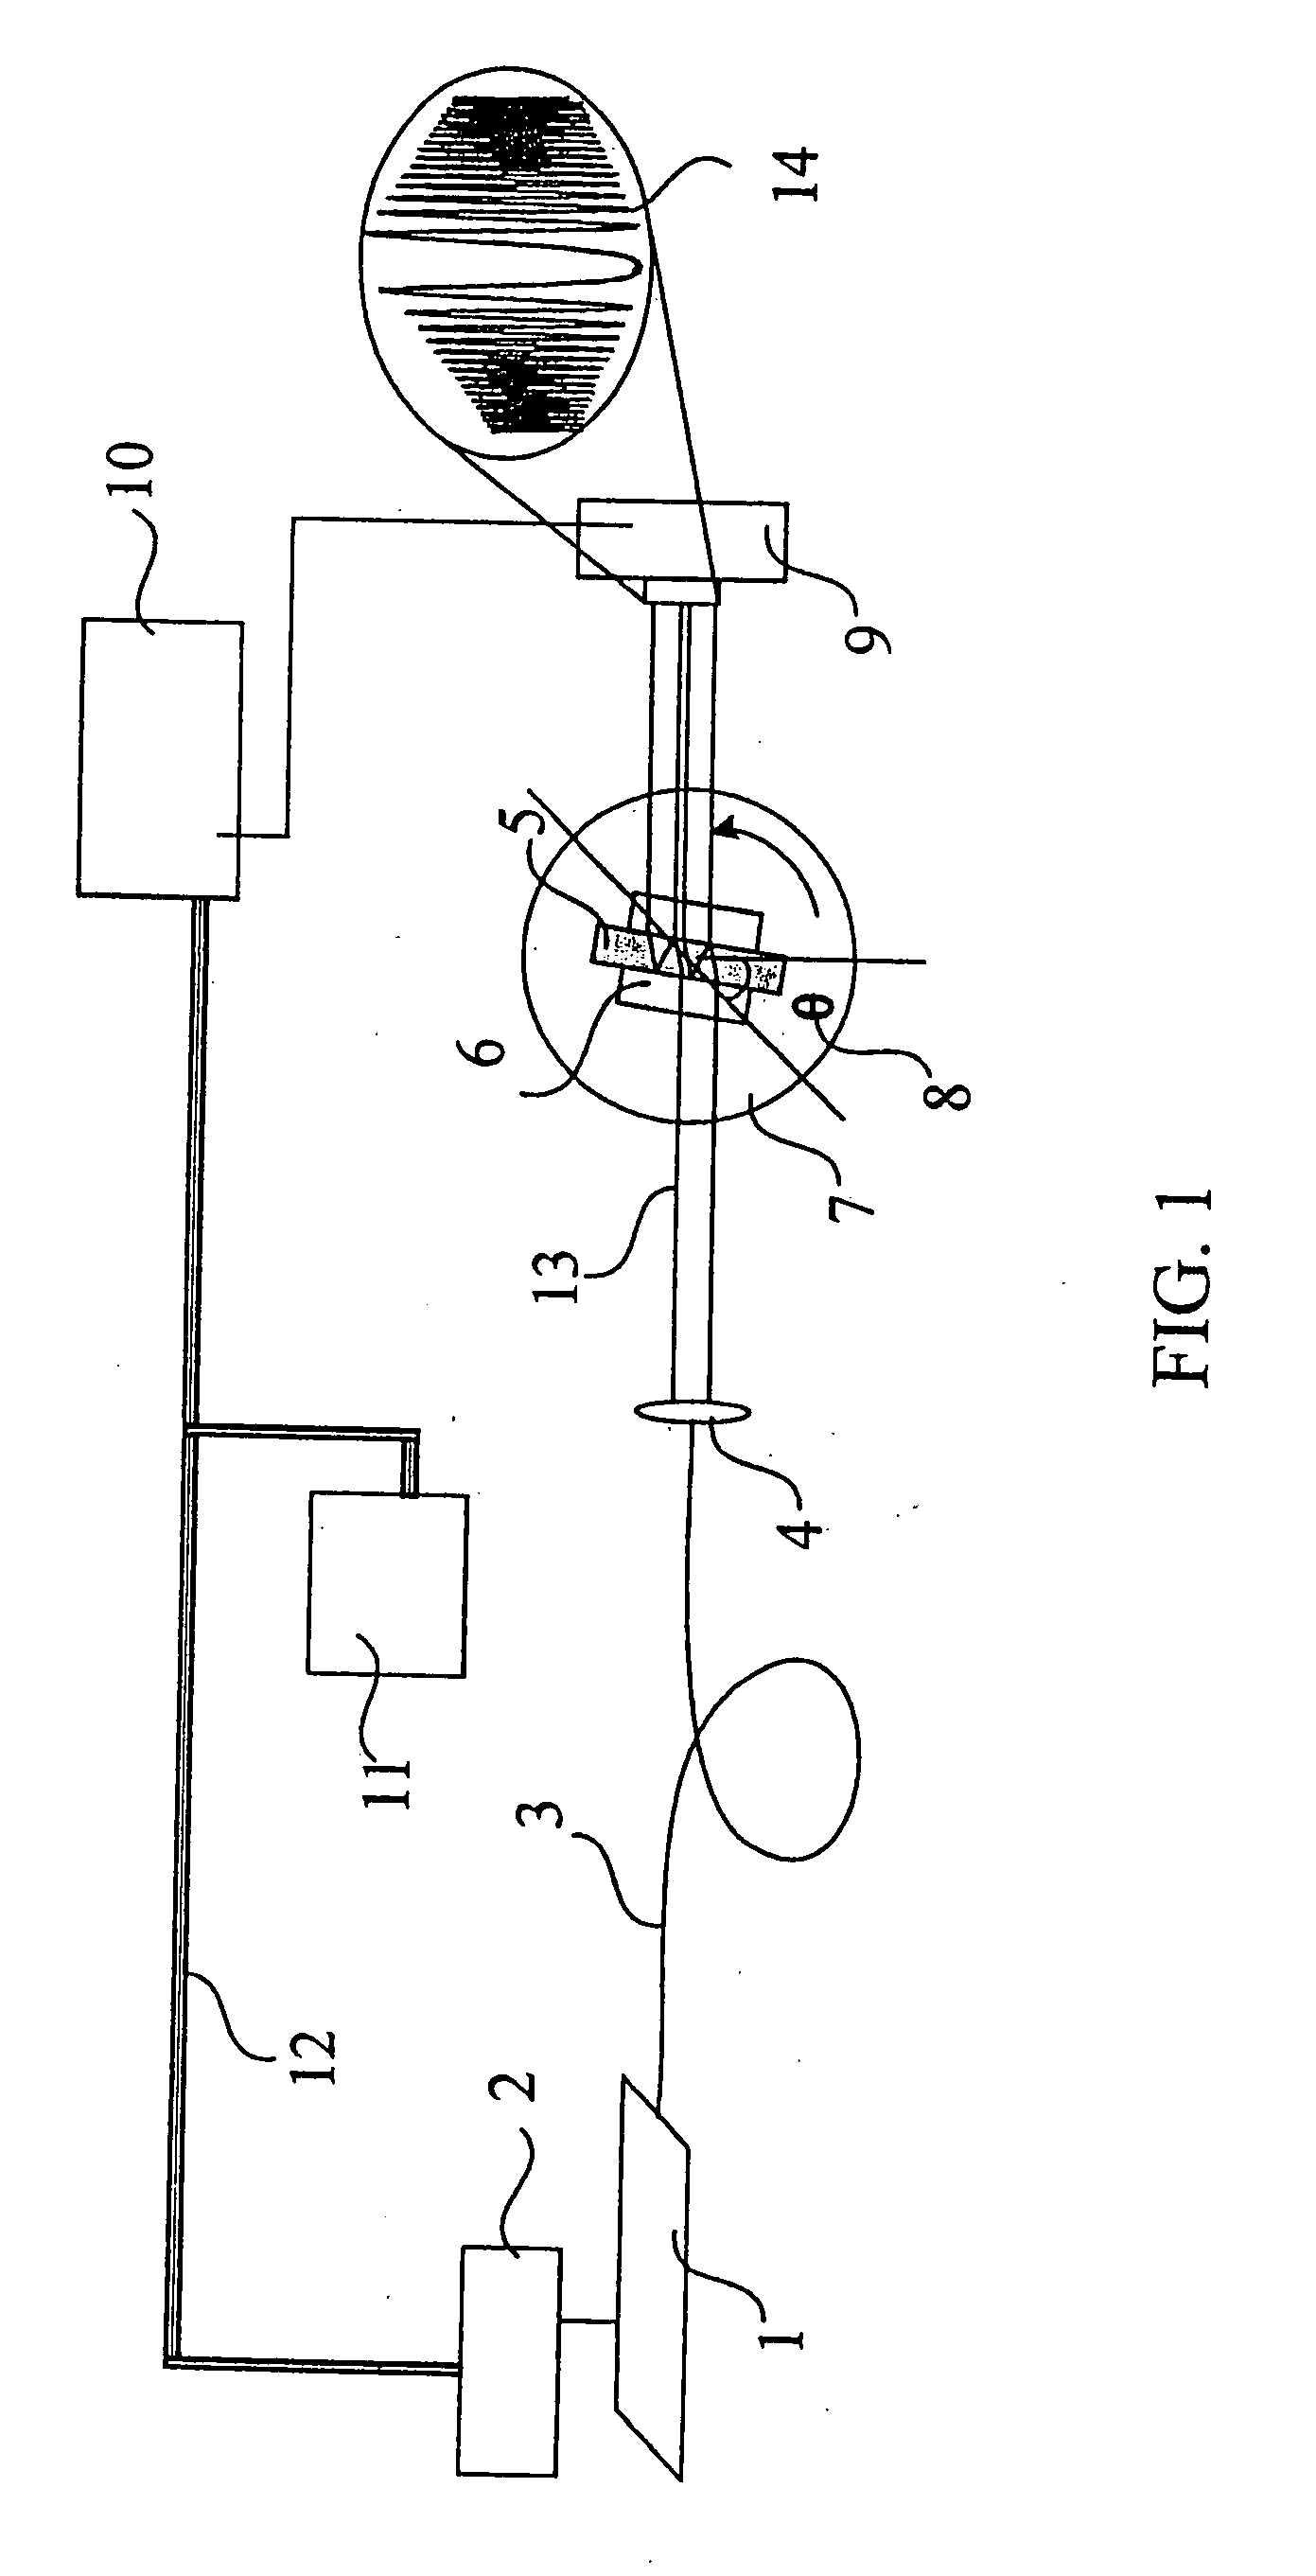 Interferometric system for the simultaneous measurement of the index of refraction and of the thickness of transparent materials, and related procedure